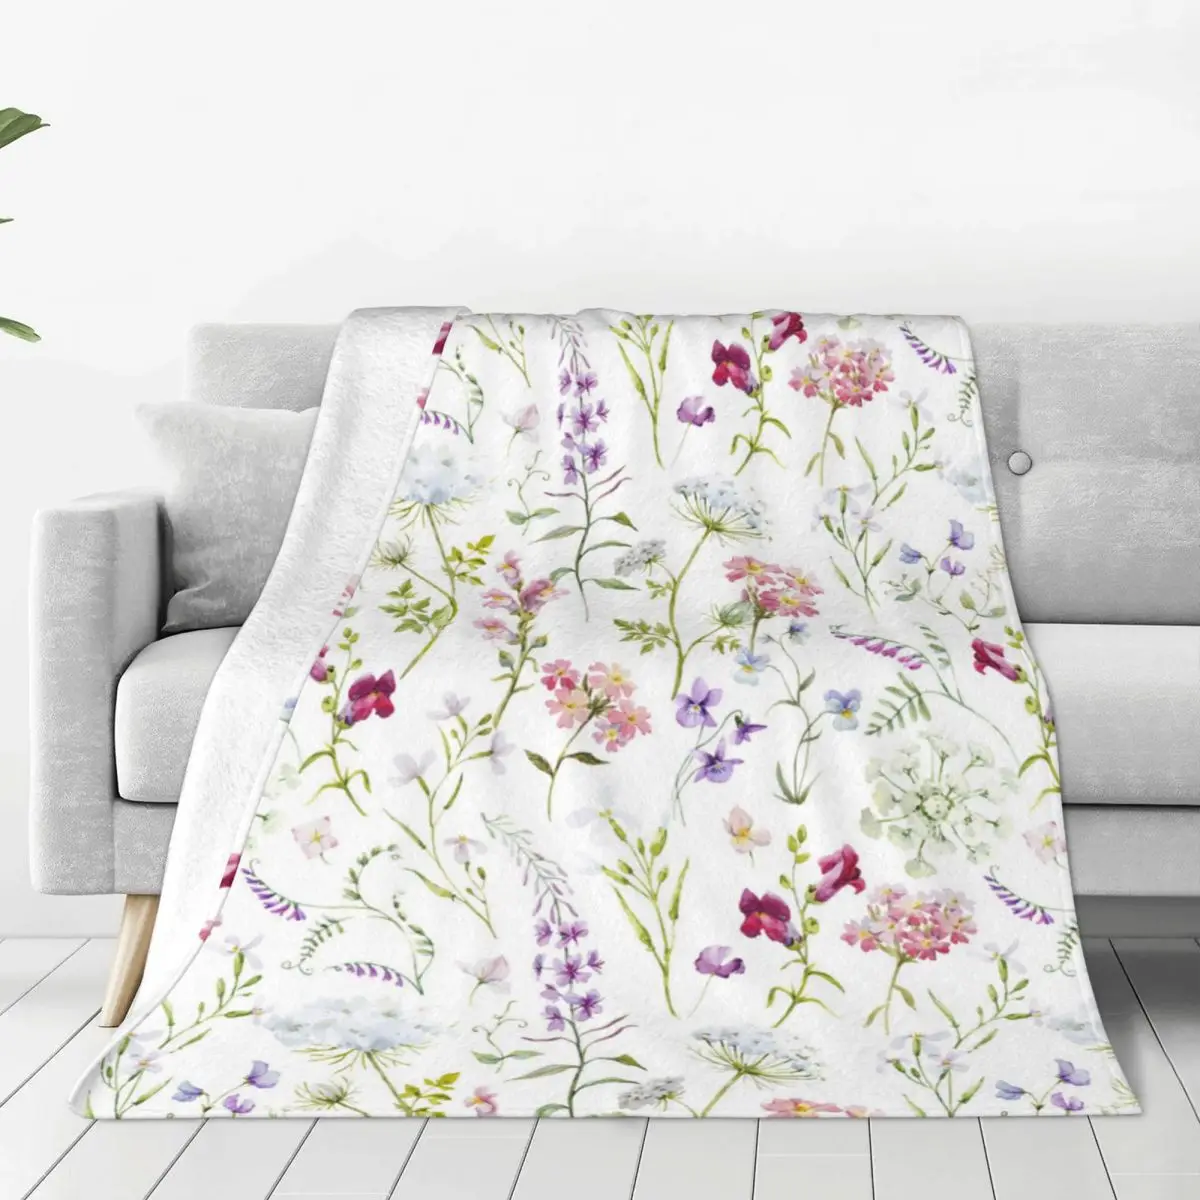 

Watercolor Floral Summer Pattern Soft Fleece Throw Blanket Warm and Cozy Comfy Microfiber Blanket for Couch Sofa Bed 40"x30"